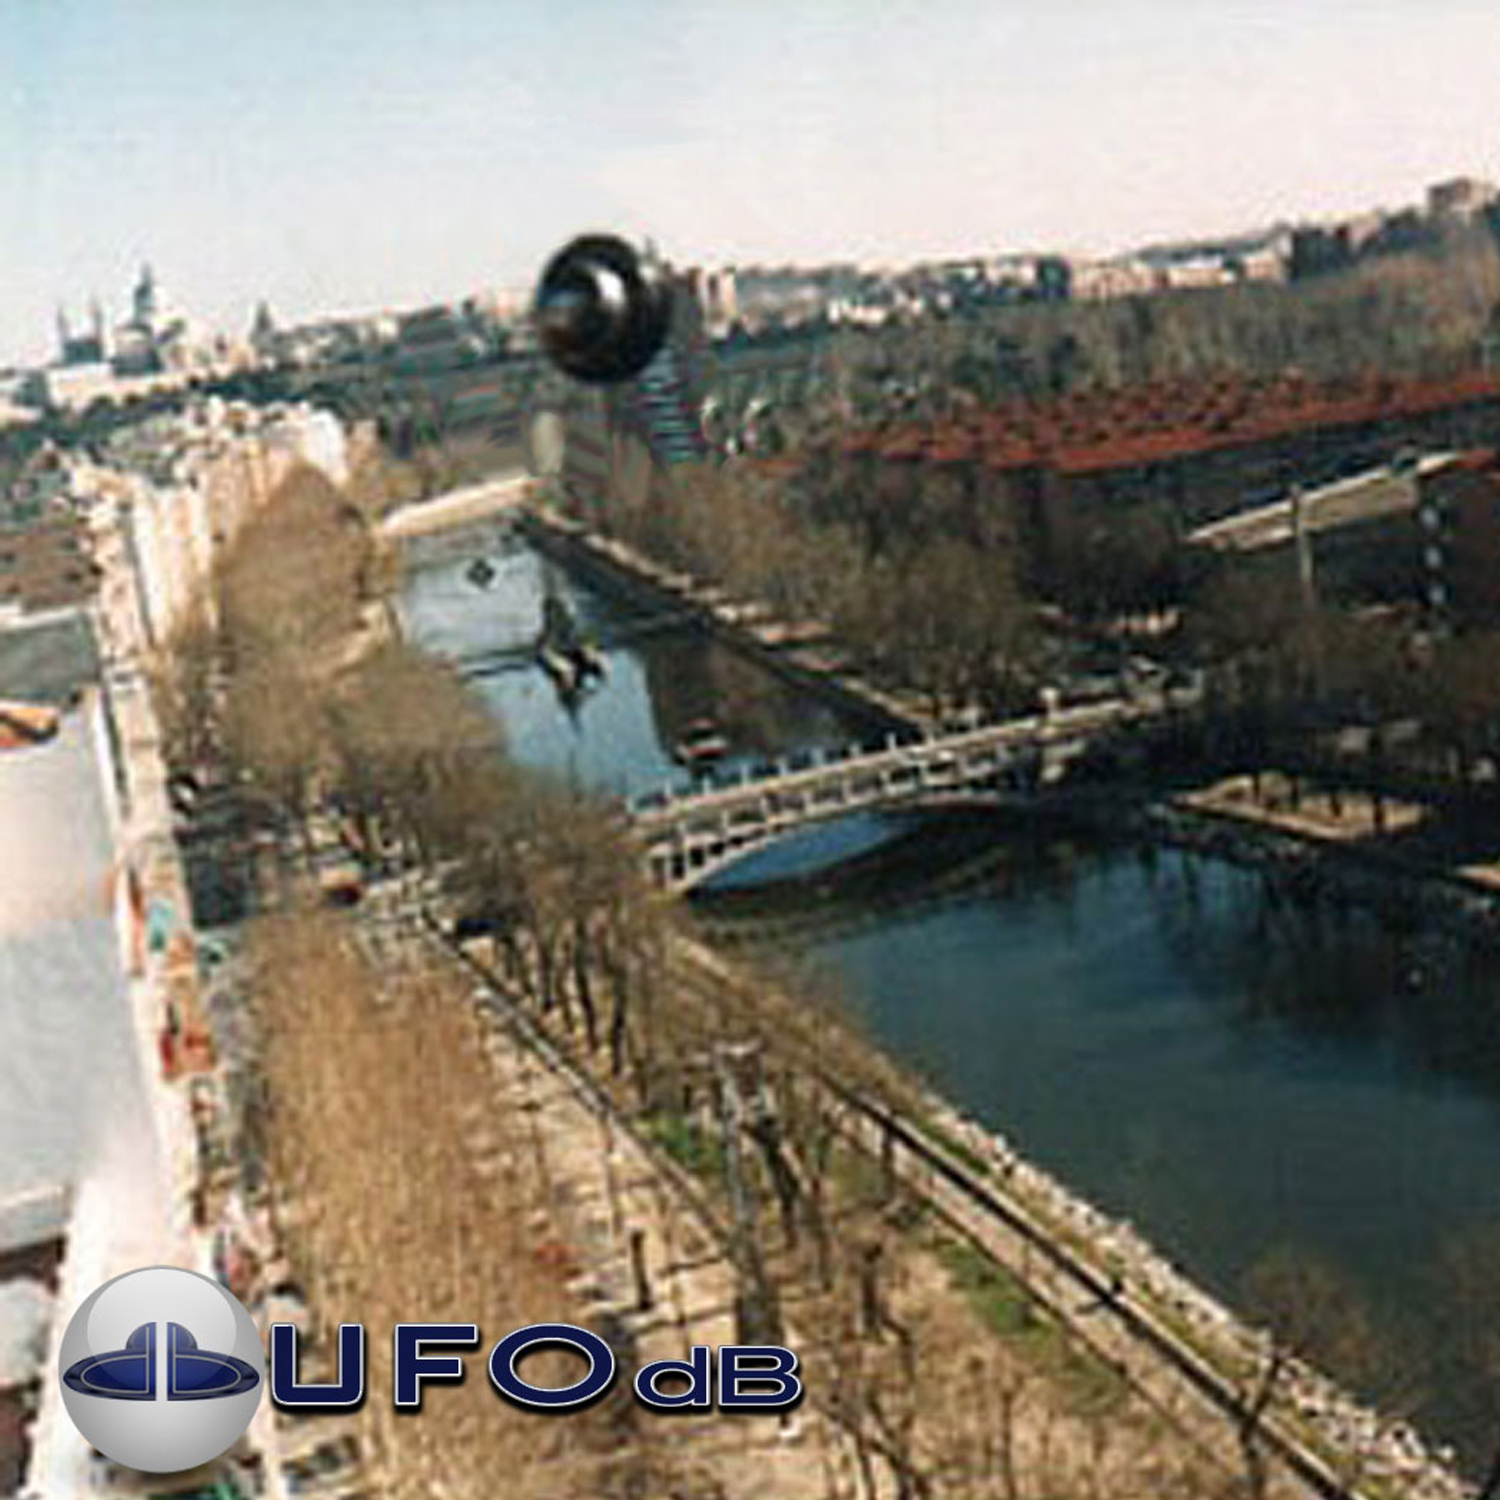 In bright day light over a water canal in the middle of Madrid UFO Picture #42-2